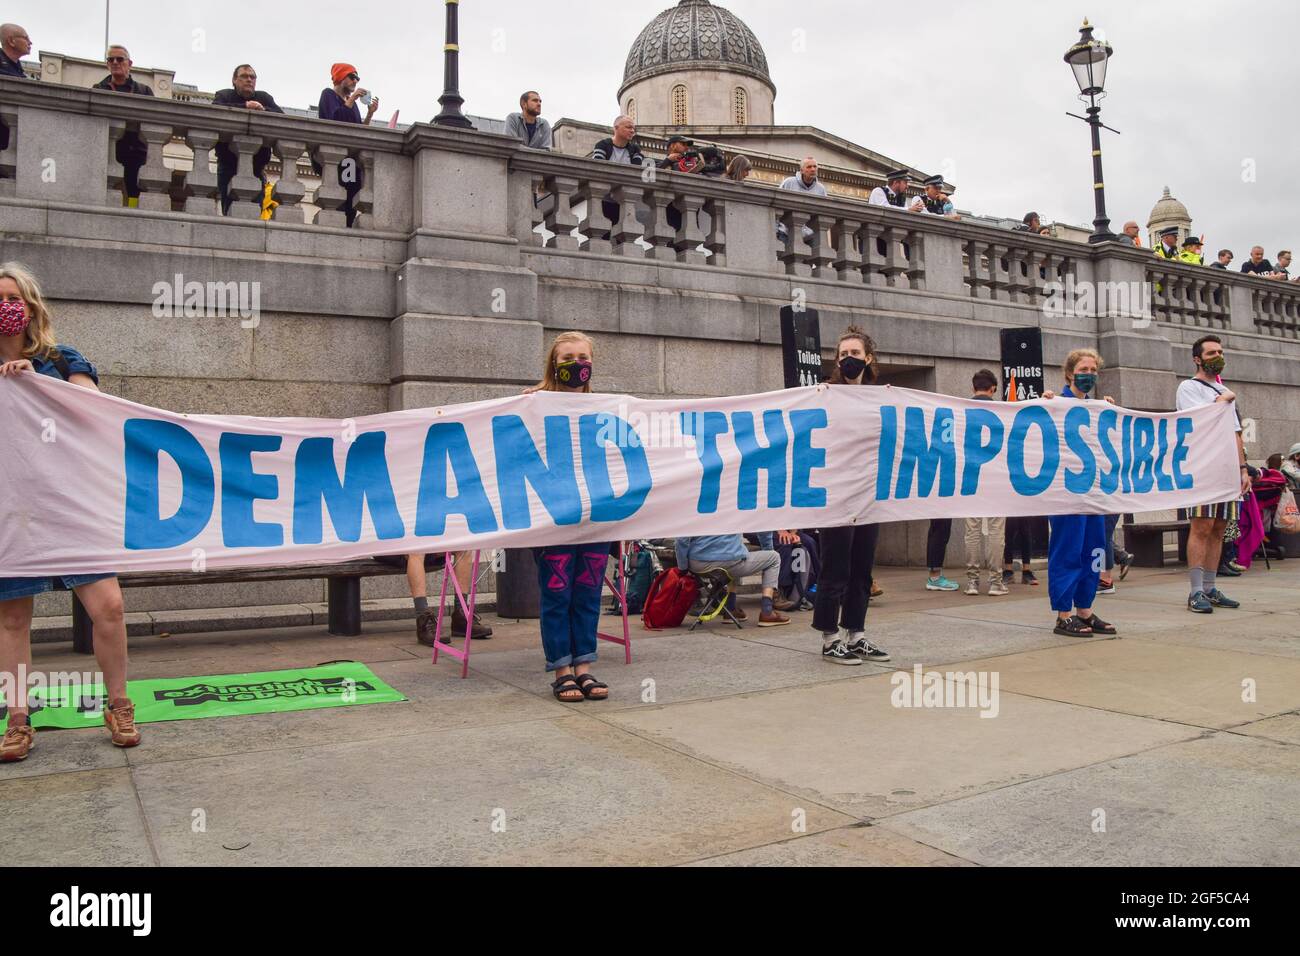 London, United Kingdom. 23rd August 2021. Extinction Rebellion protesters in Trafalgar Square at the start of their two-week campaign, Impossible Rebellion. (Credit: Vuk Valcic / Alamy Live News) Stock Photo